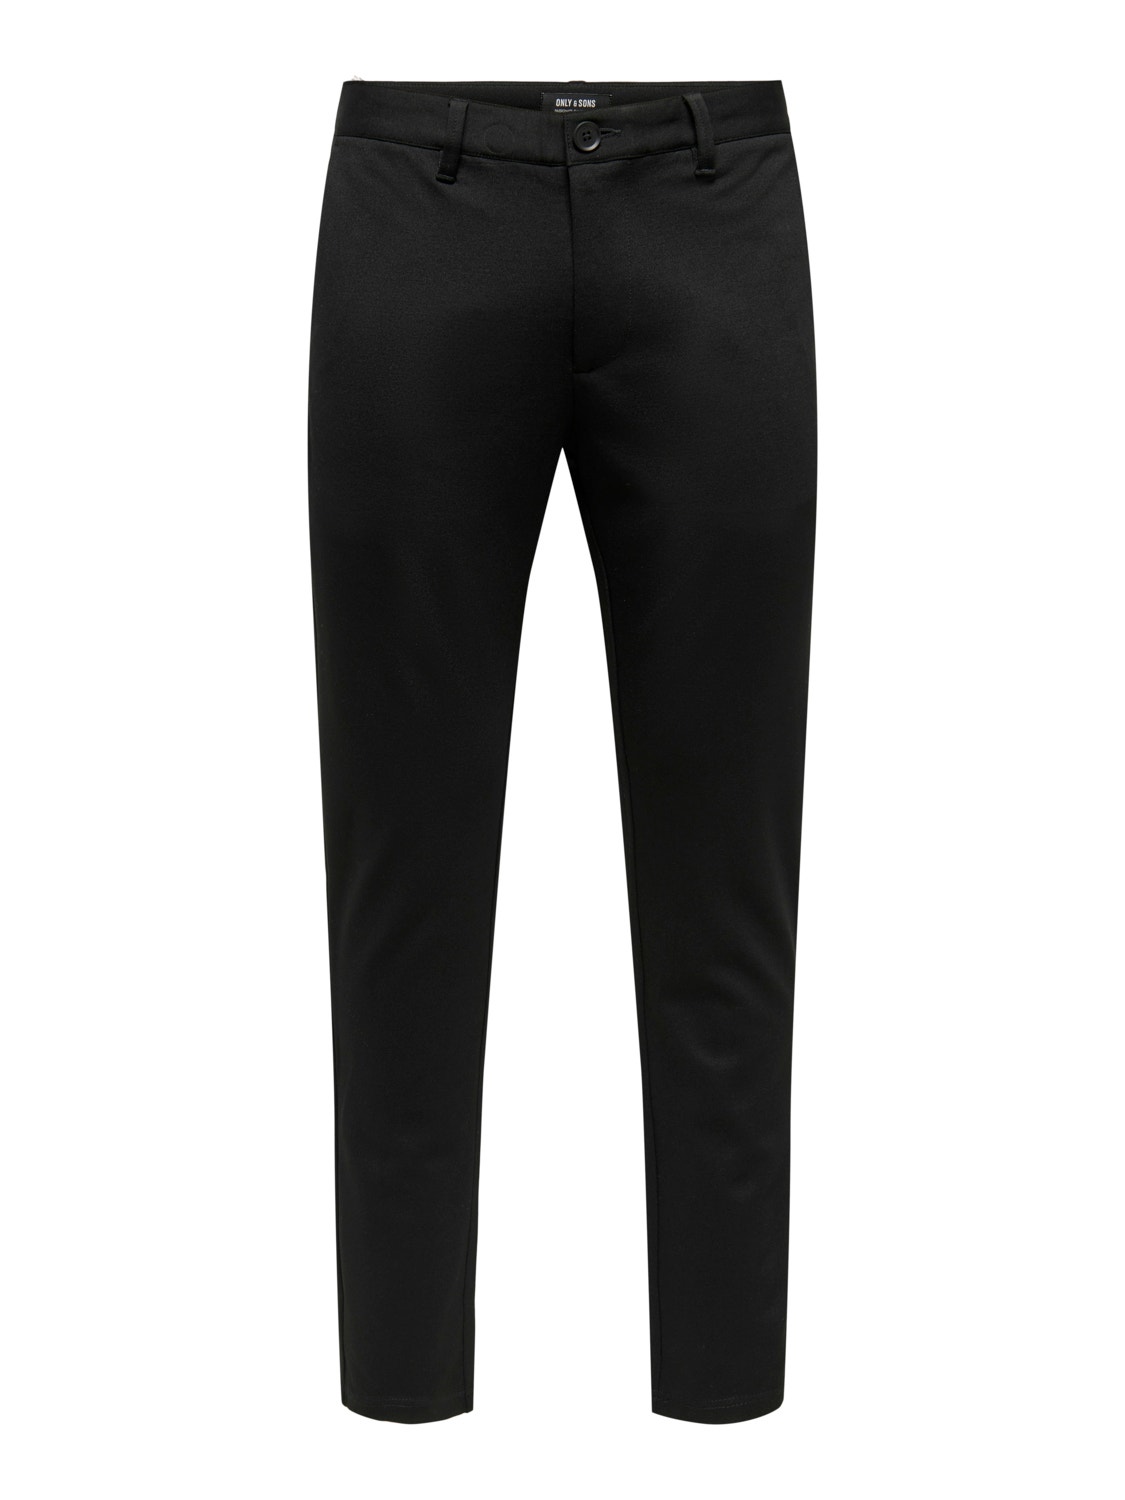 ONLY & SONS Normal geschnitten Chino Hose -Black - 22022910